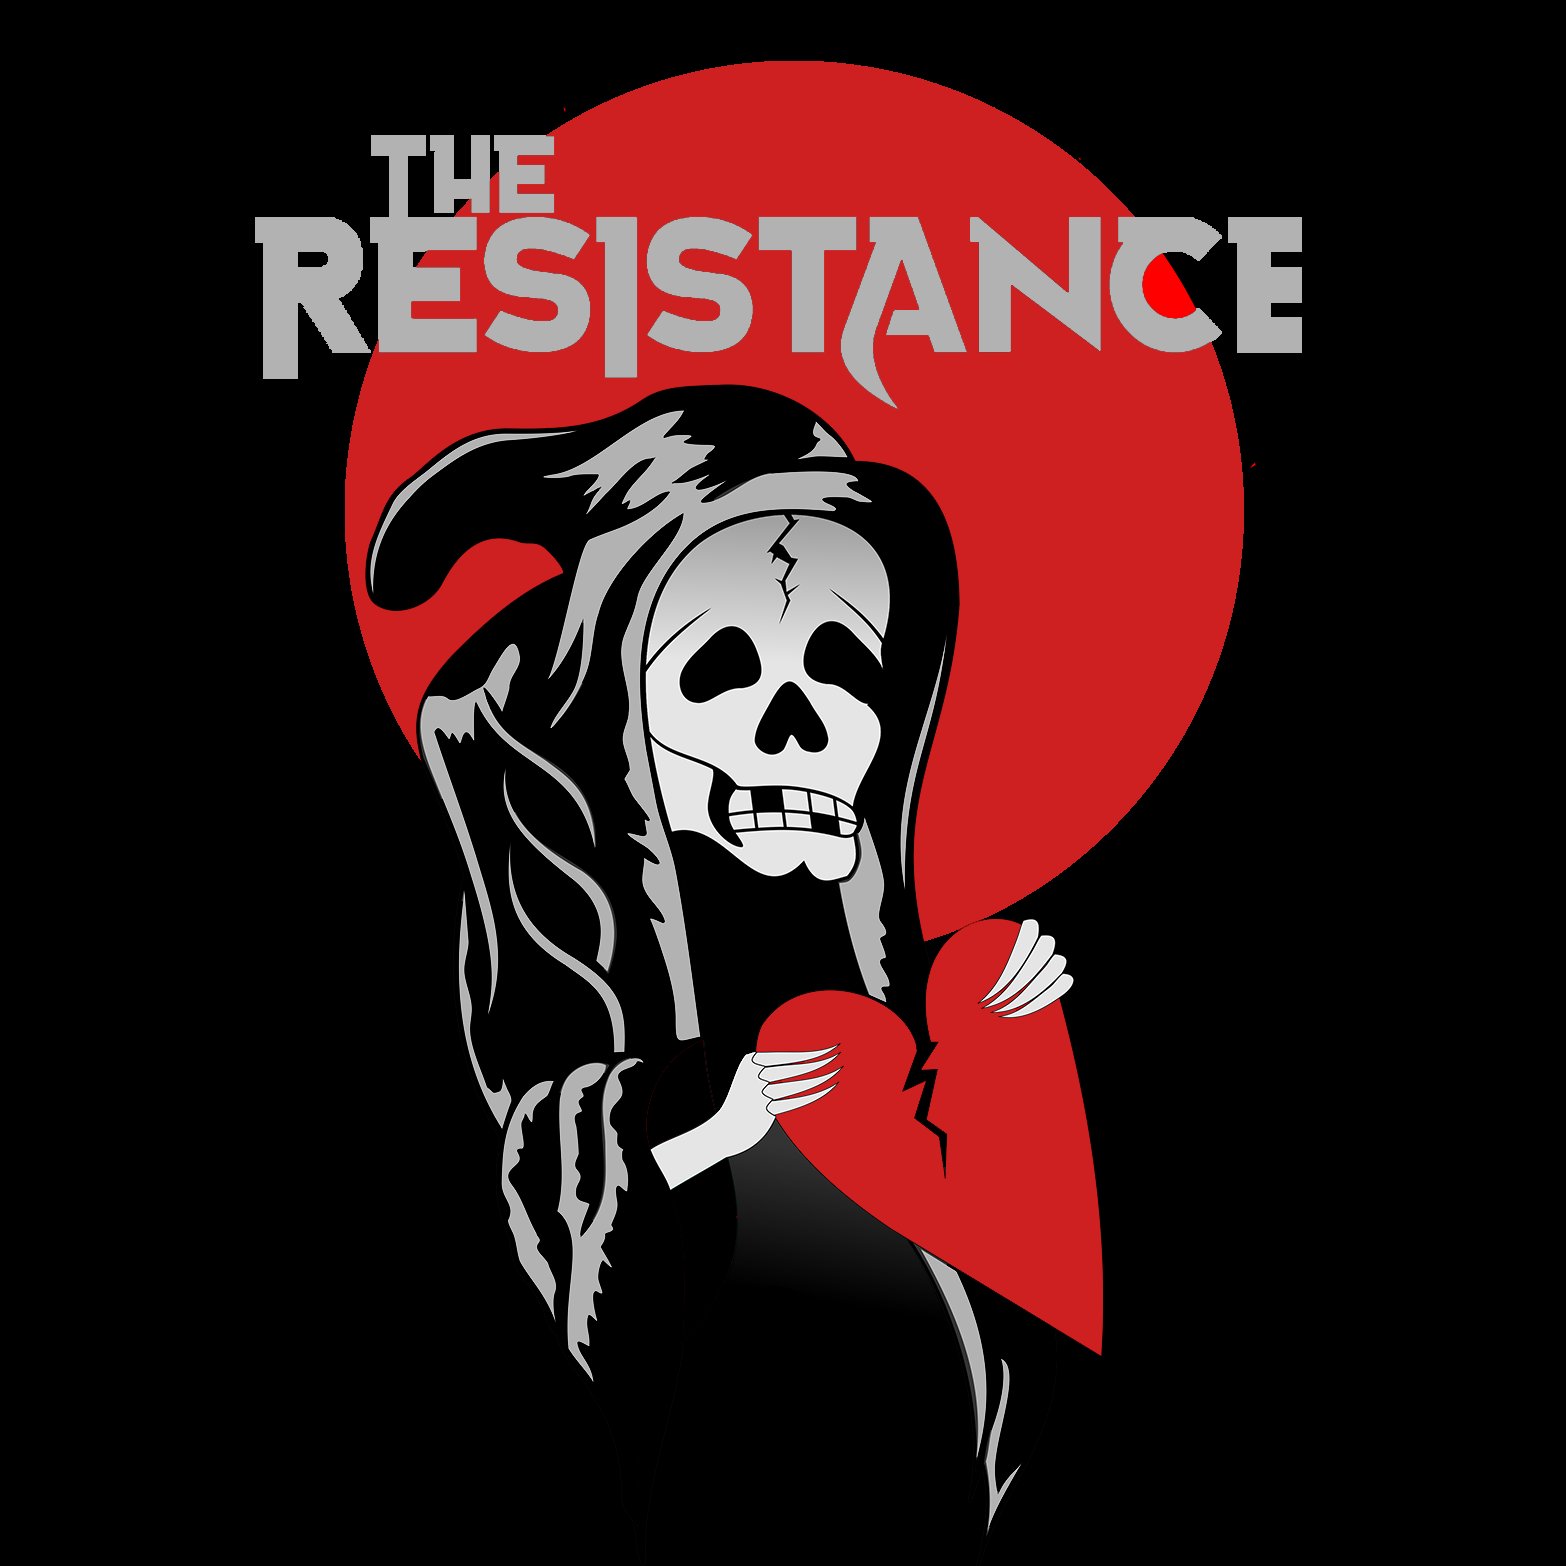 The Resistance Clothing Company produces premium threads inspired by the great for the great. Be part of something more, join the resistance. IG|@theresistance_